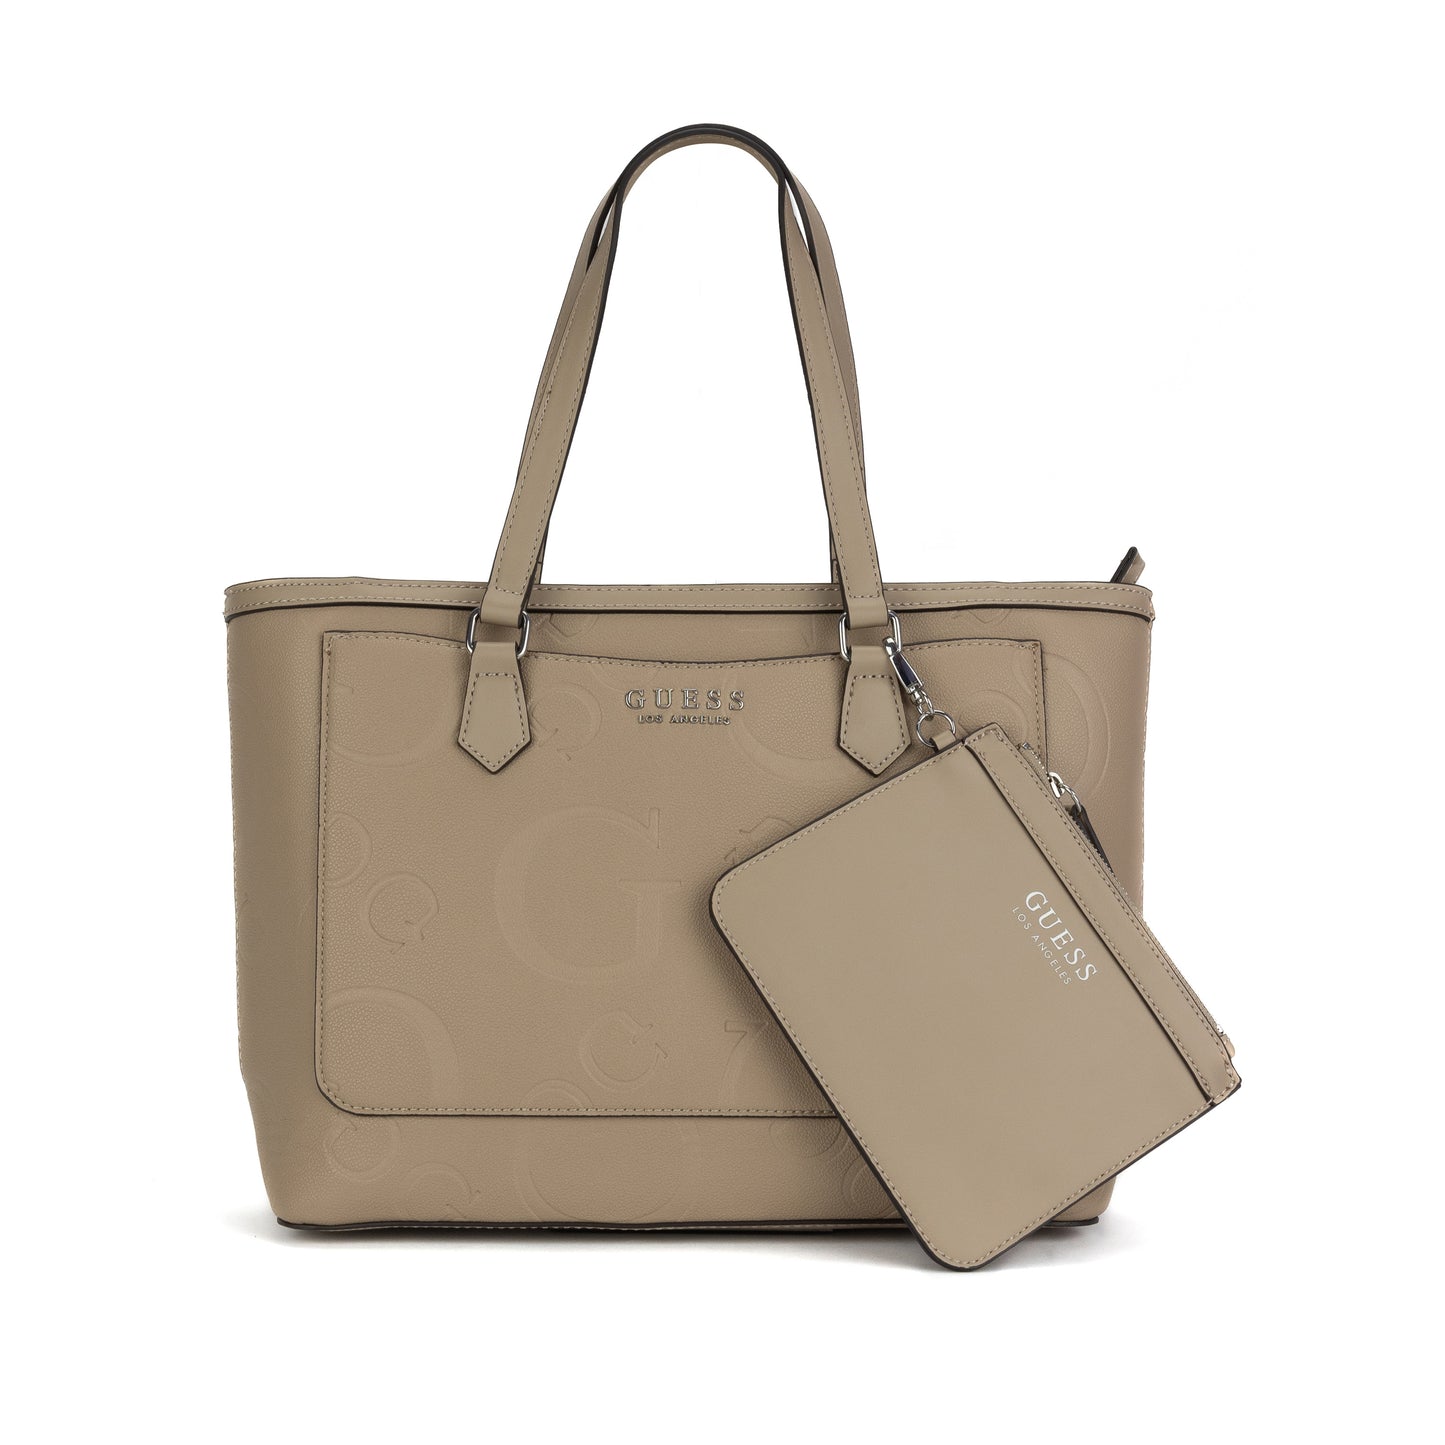 Guess Women's Medford Tote Bag- Taupe